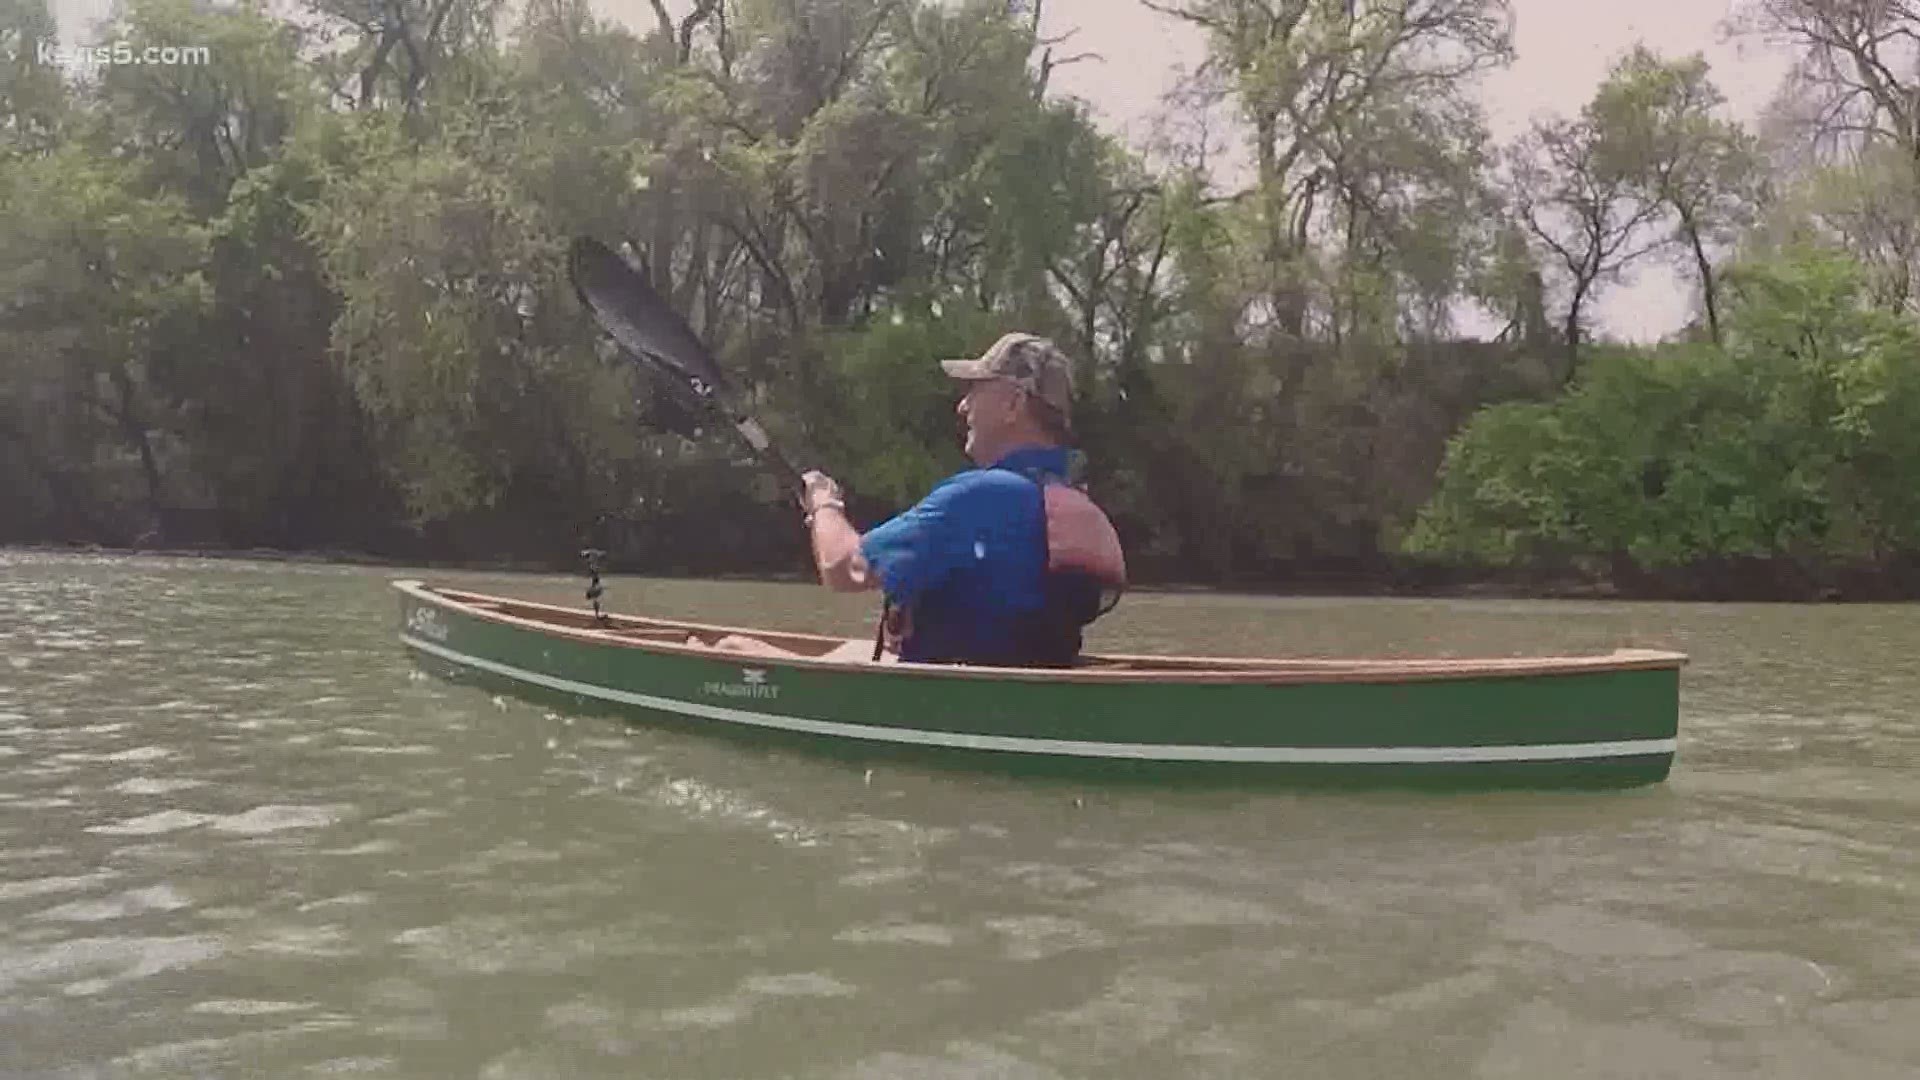 KENS 5's Barry Davis checks out a river that runs through the heart of the state of Texas.